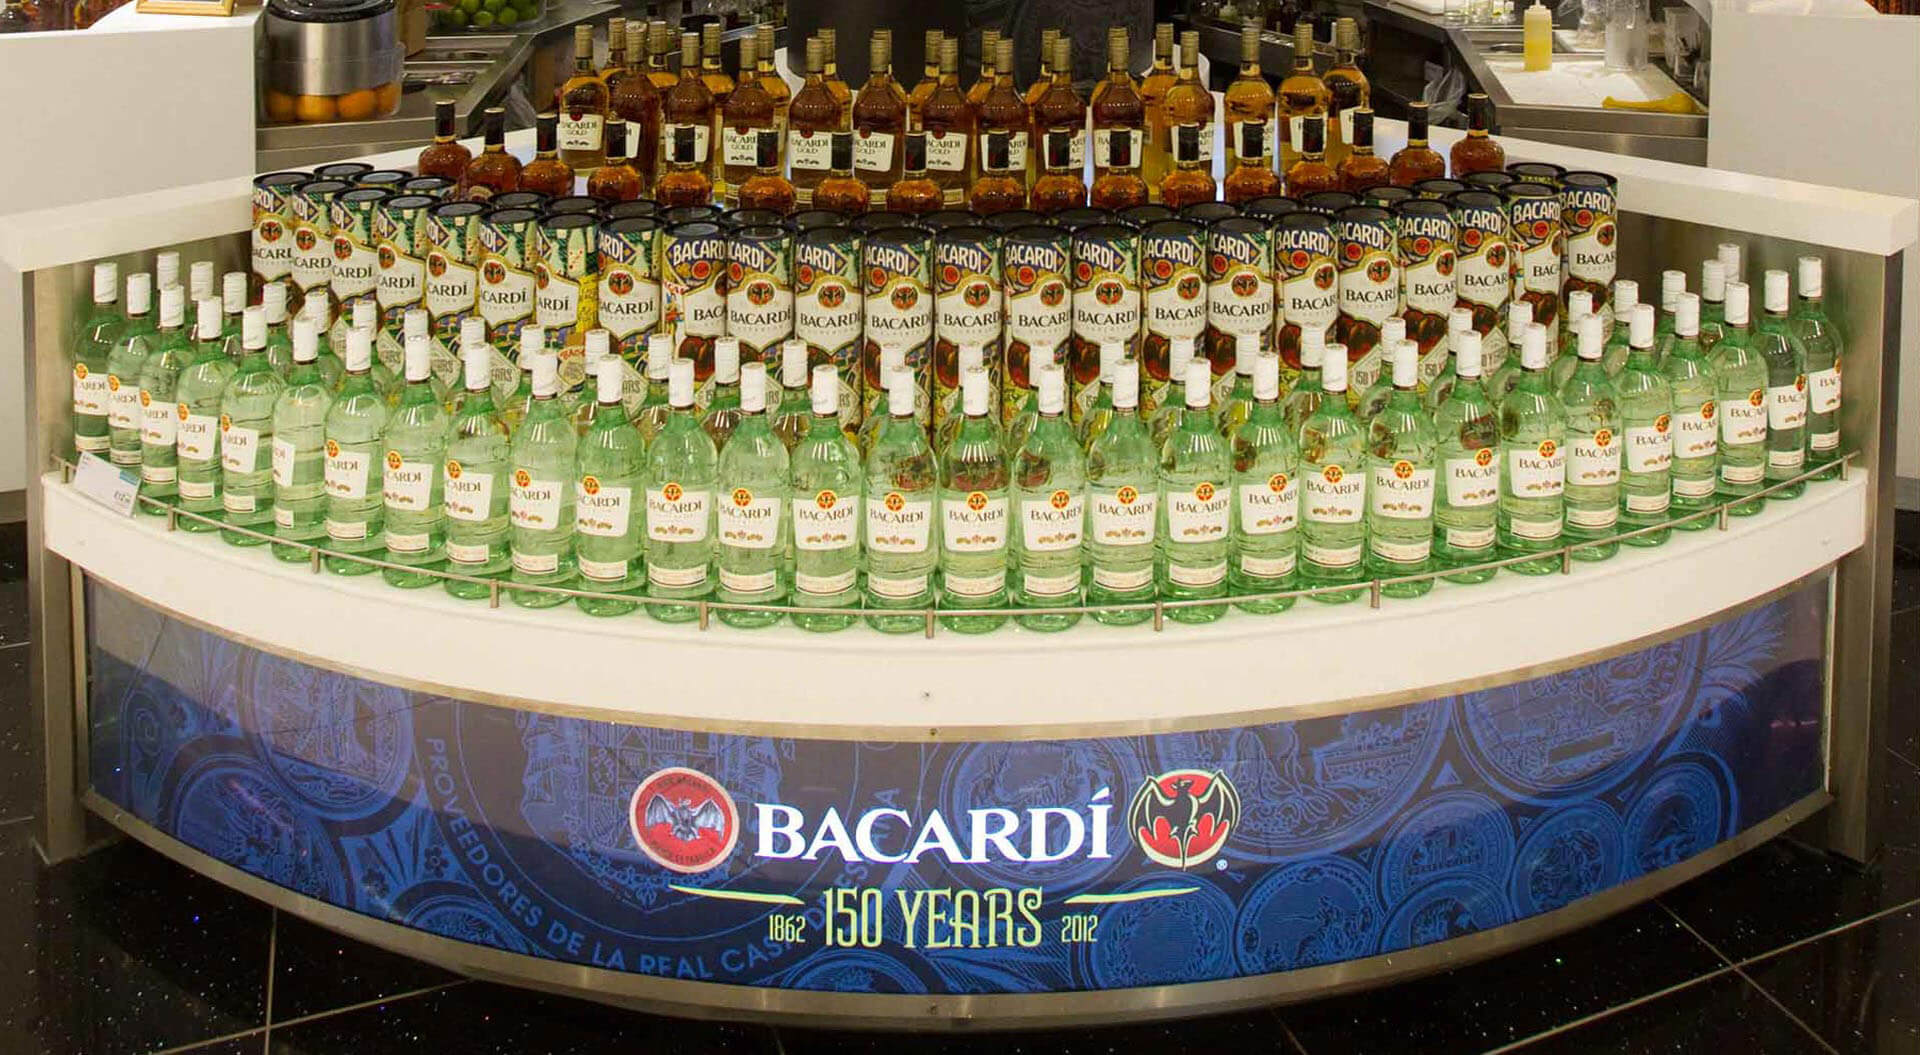 Bacardi 150 Years celebration merchandising system design and store interior World Duty Free Heathrow Terminal 5 graphic promotions